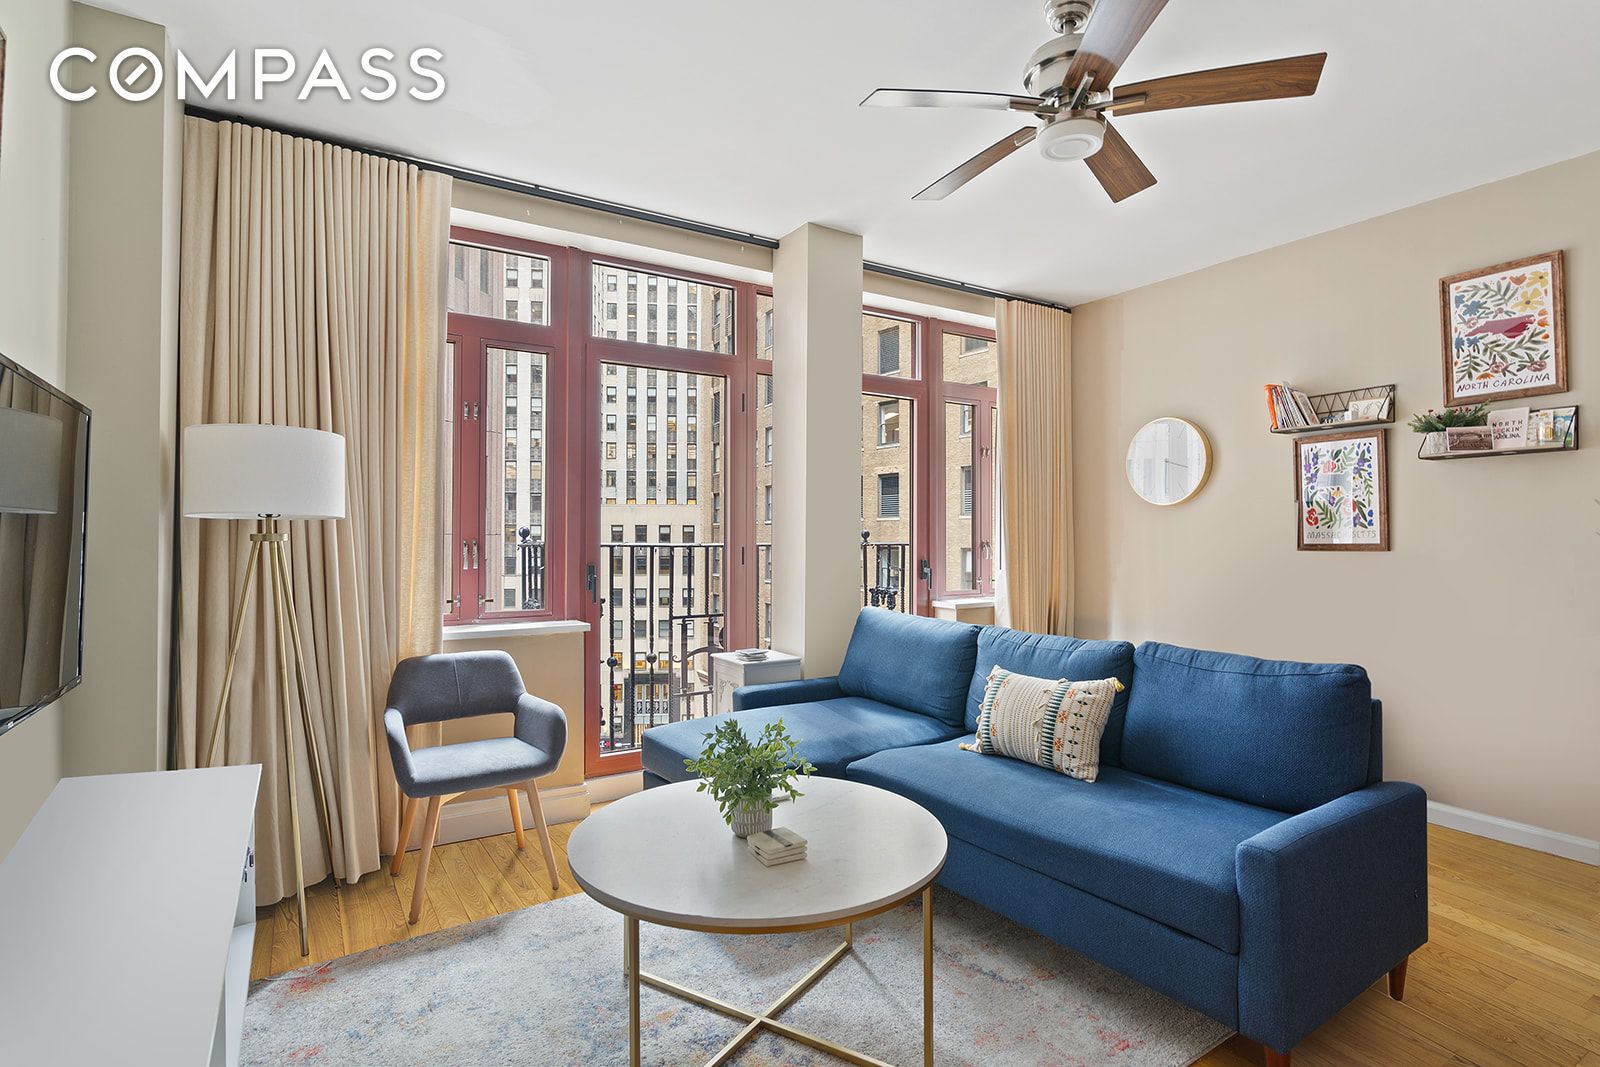 South William Street 7C, Financial District, Downtown, NYC - 1 Bedrooms  
1 Bathrooms  
1 Rooms - 